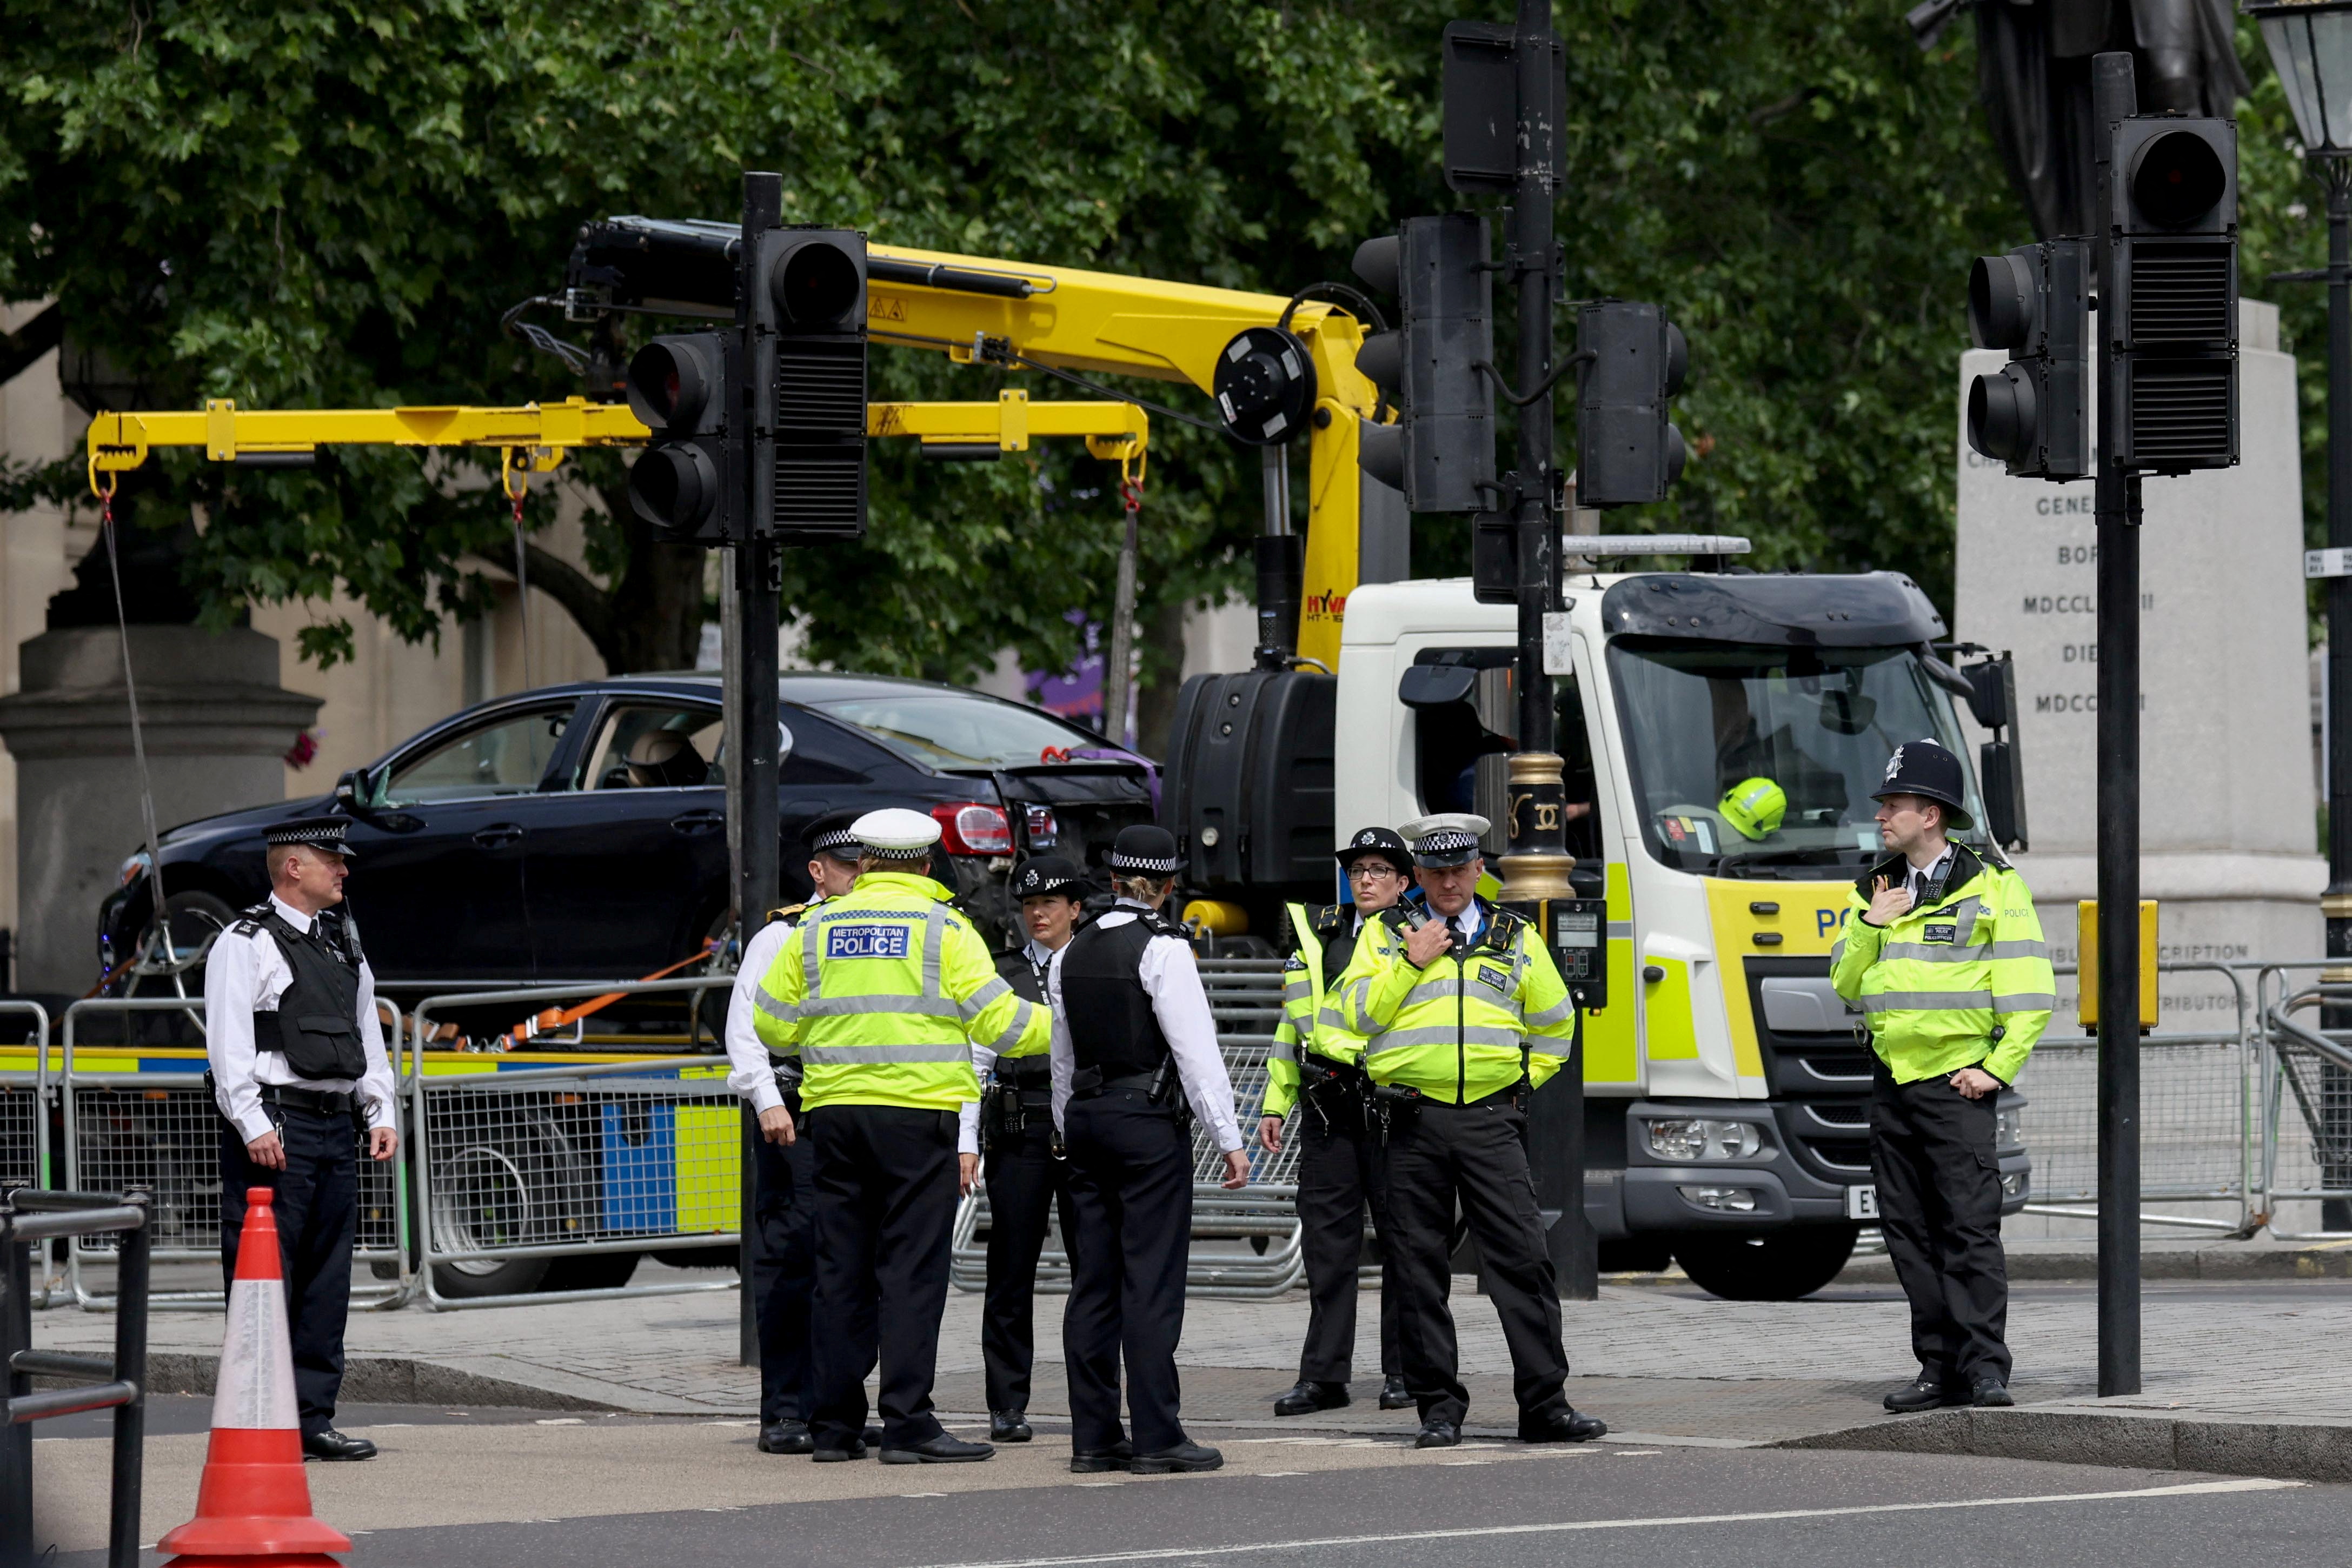 A police car clears a car after a security incident near Trafalgar Square, as Queen Elizabeth's platinum jubilee celebrations continue, in London, Britain, June 4, 2022. REUTERS/Phil Noble